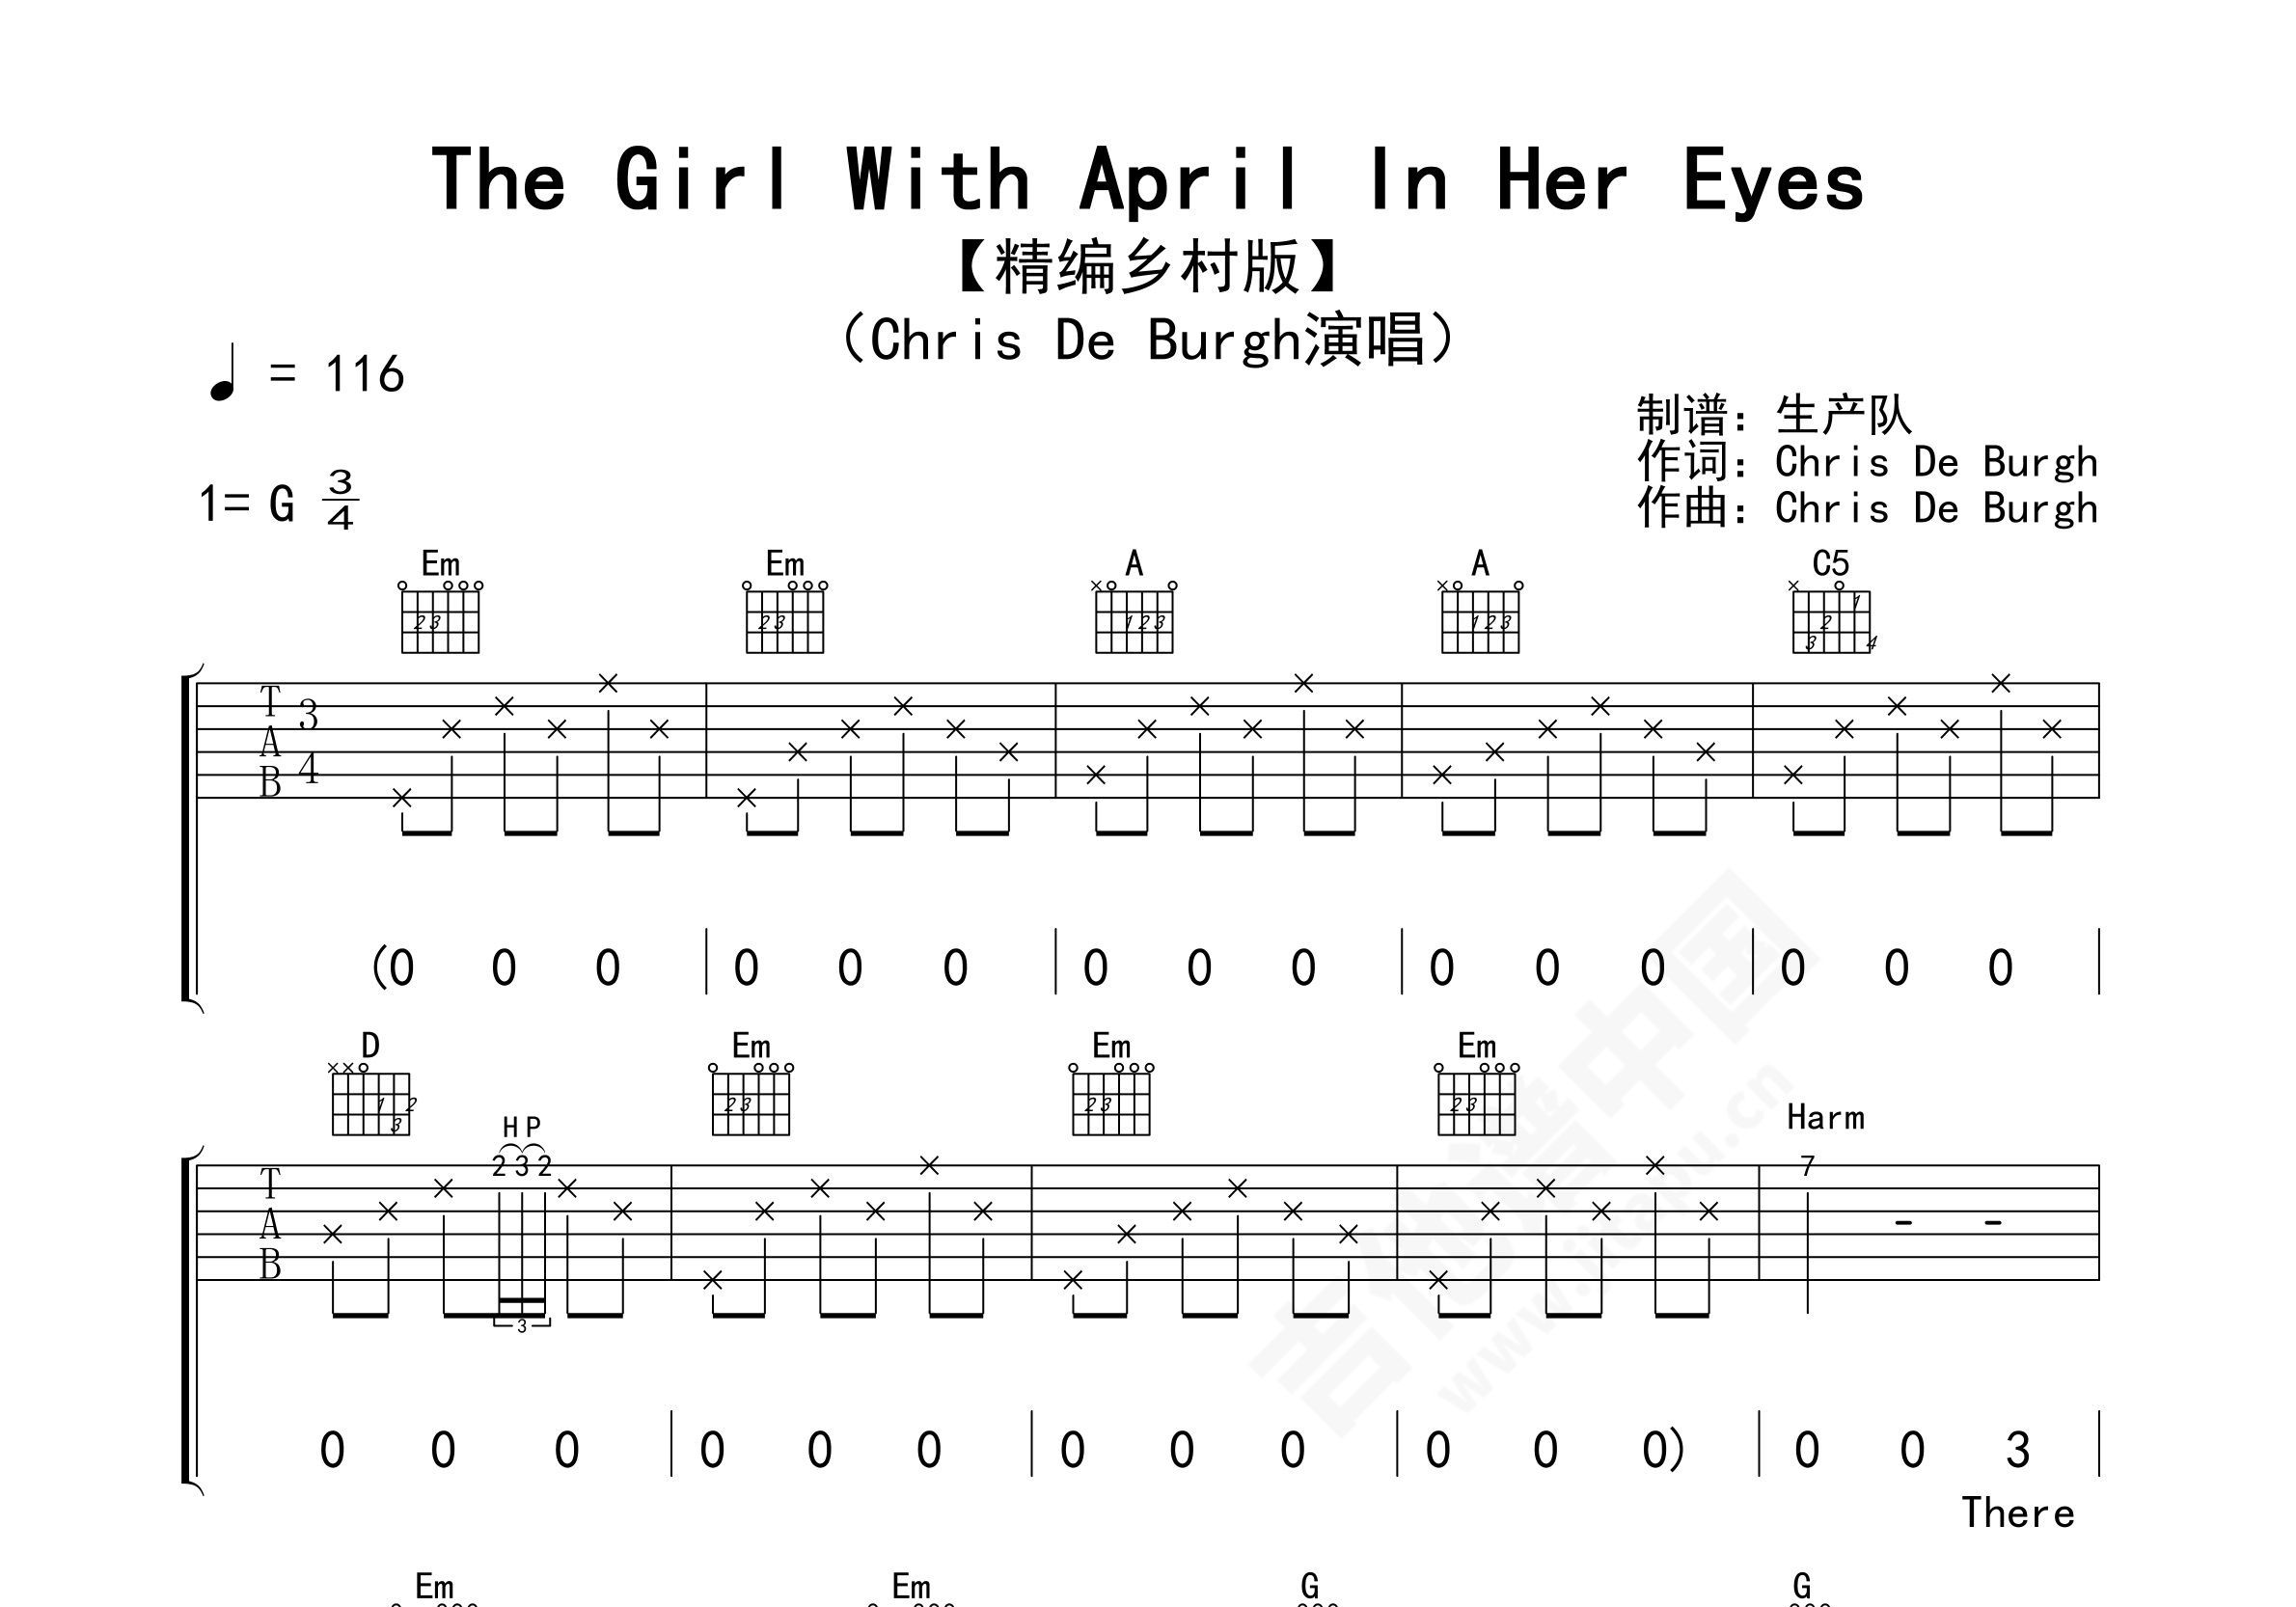 The Girl With April In Her Eyes